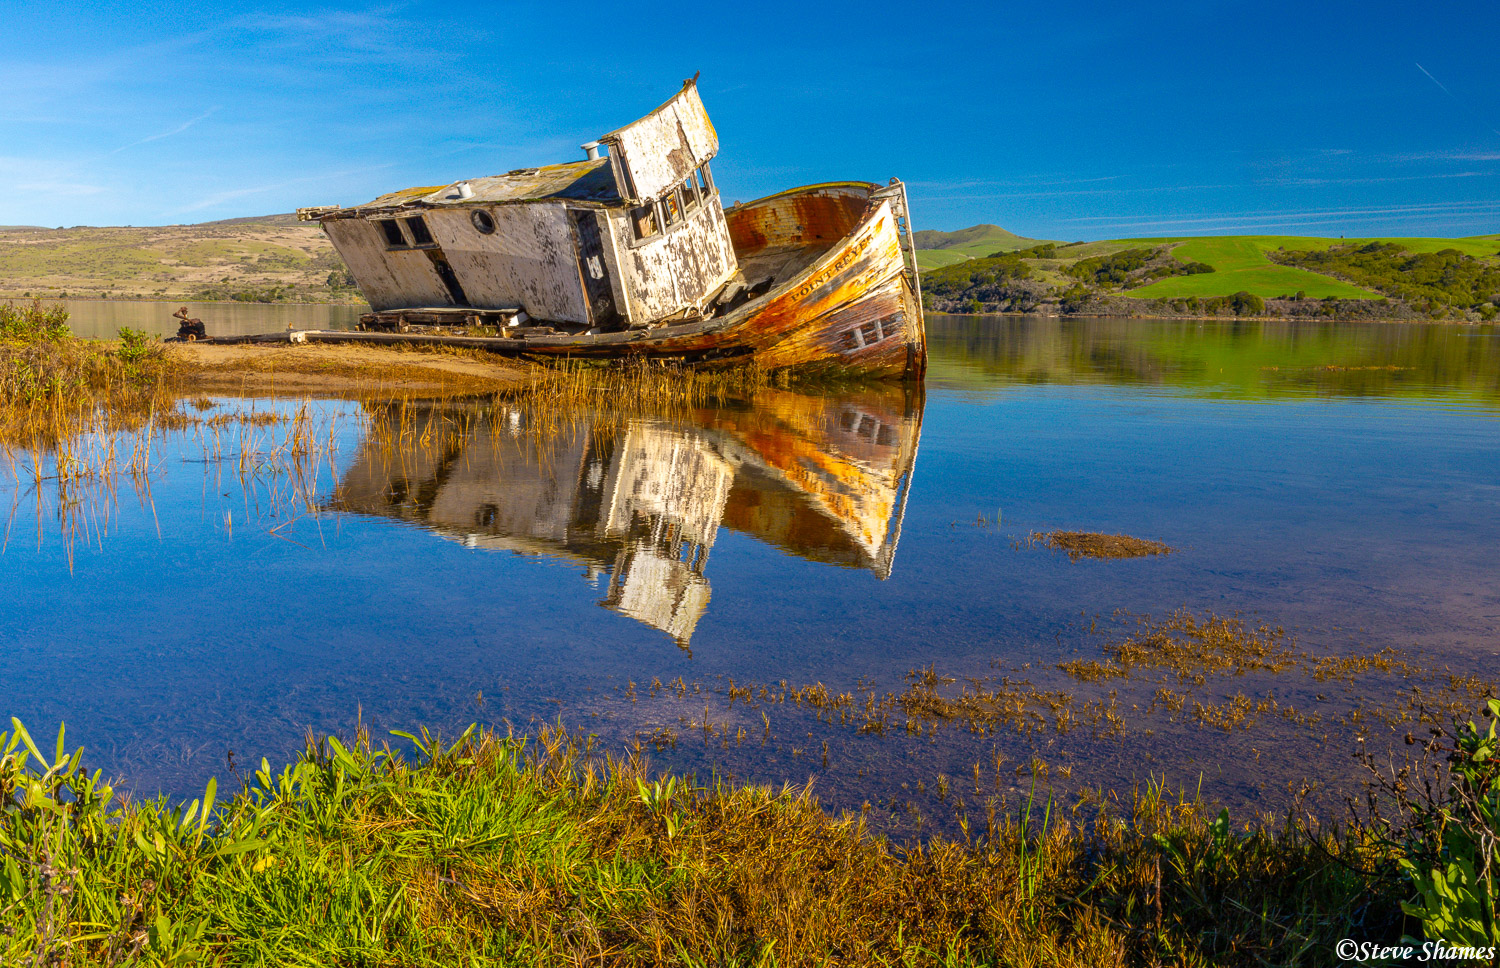 I love this old shipwreck in Tomales Bay, near Point Reyes.